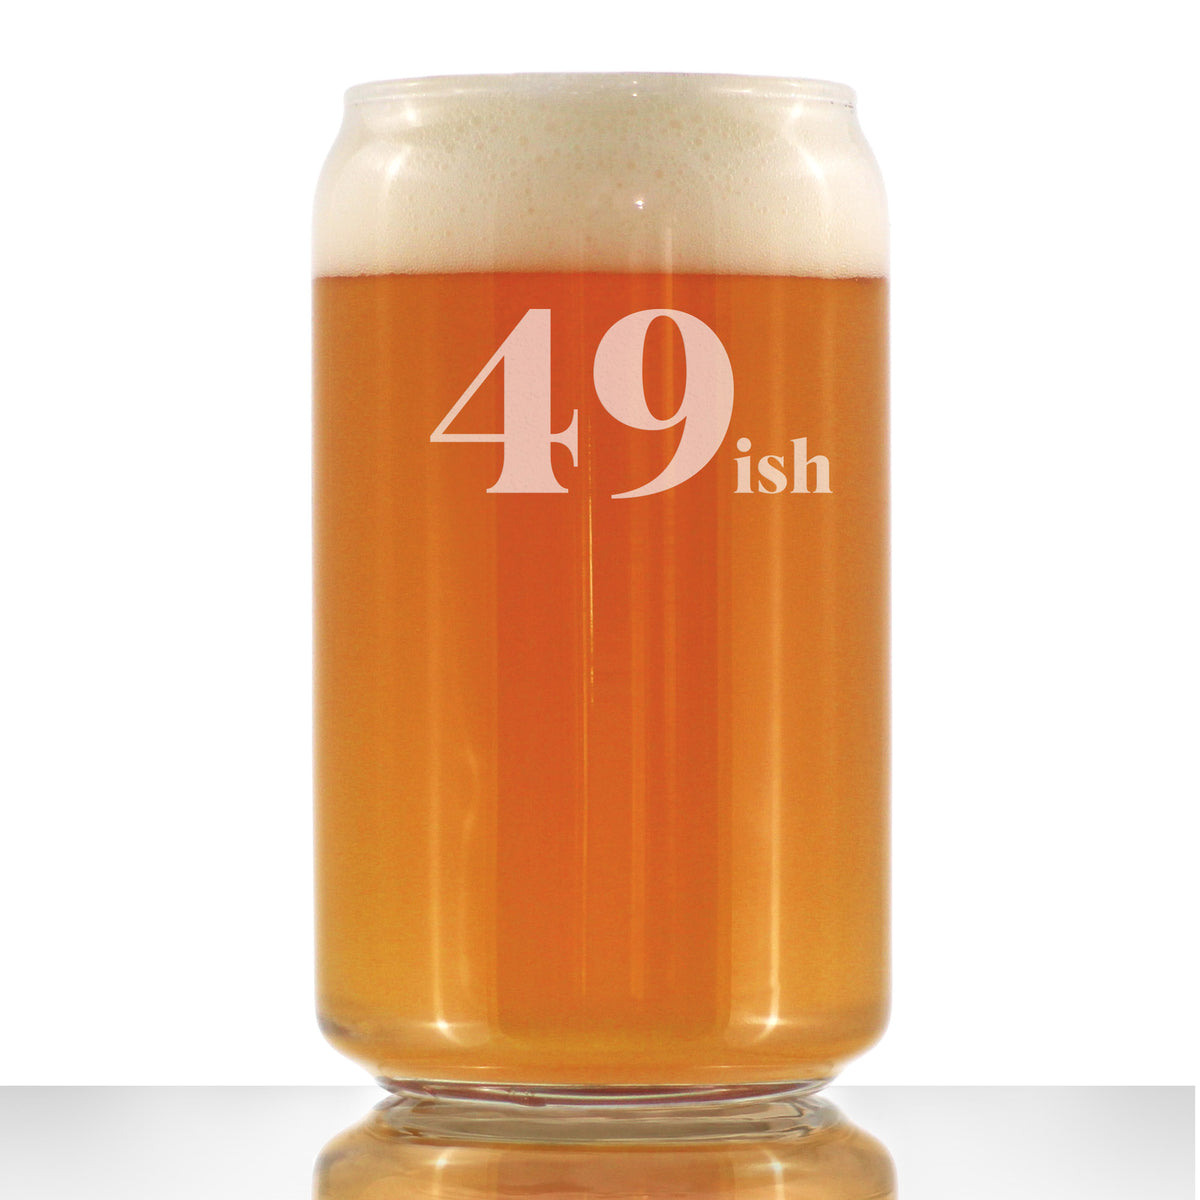 49ish - Funny 16 oz Beer Can Pint Glass - 50th Birthday Gifts for Men or Women Turning 50 - Fun Bday Decor